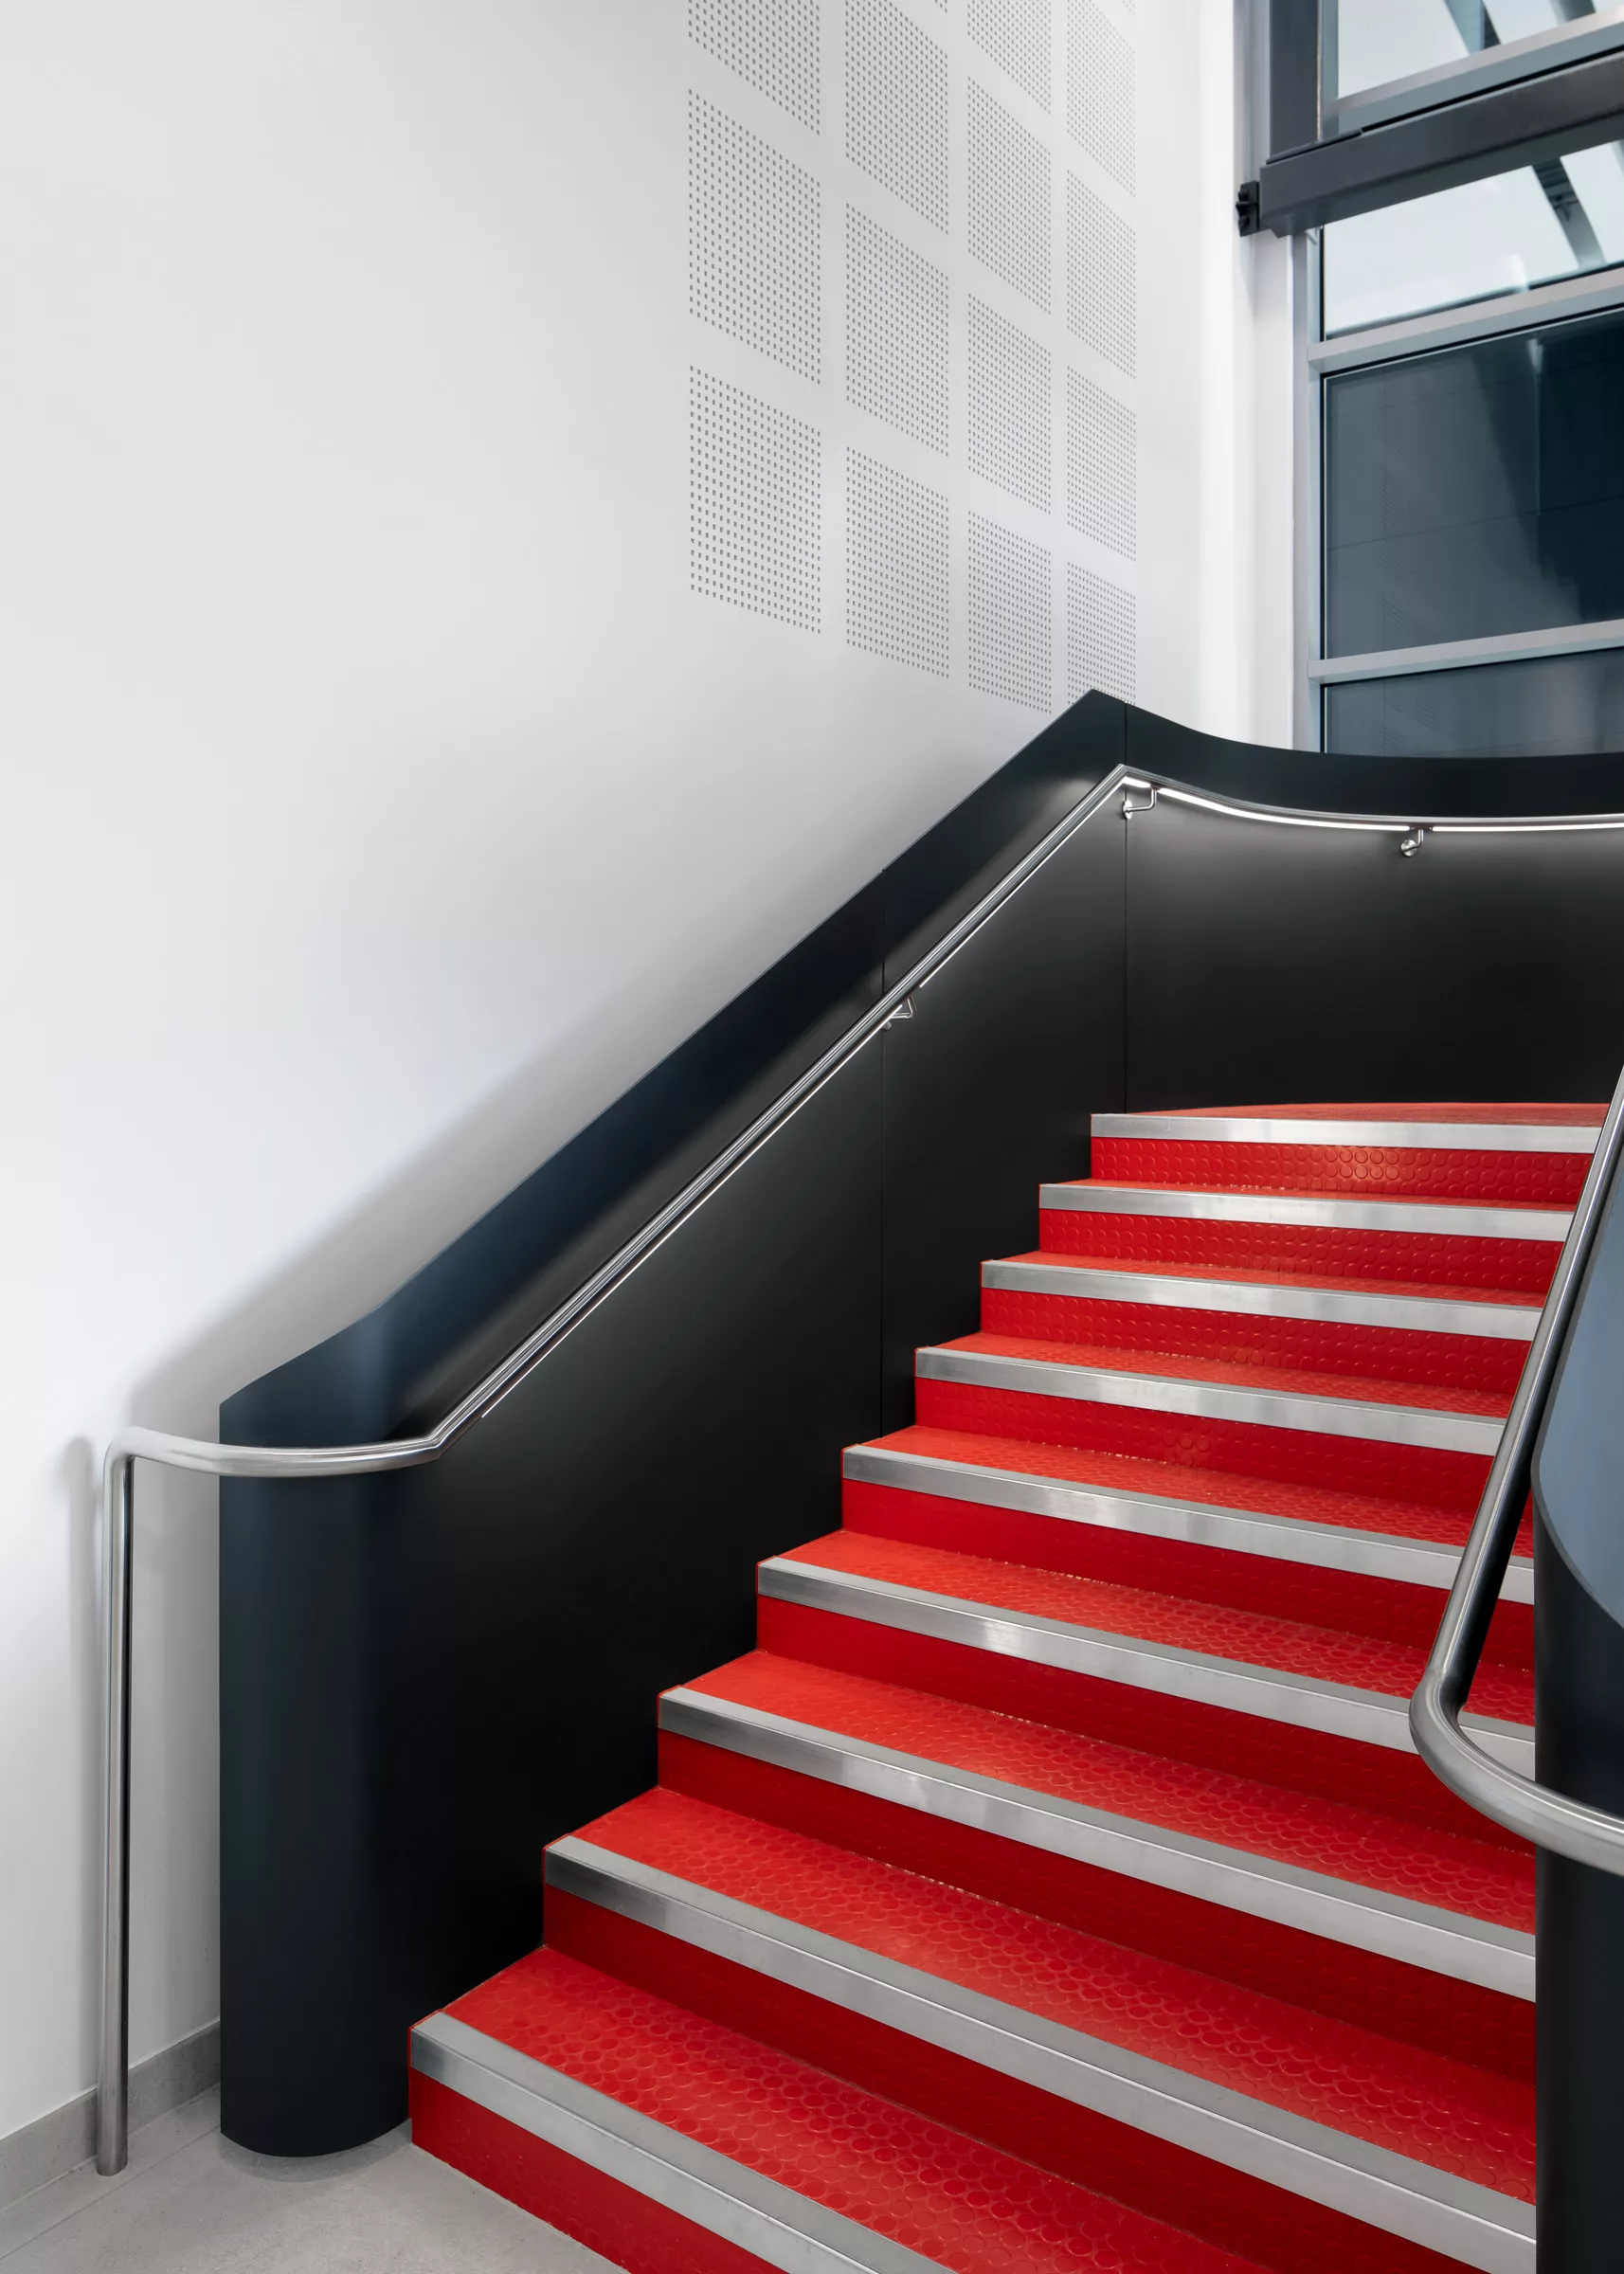 the light lab | LED Handrail | cardiff university architecture wales architectural web 8